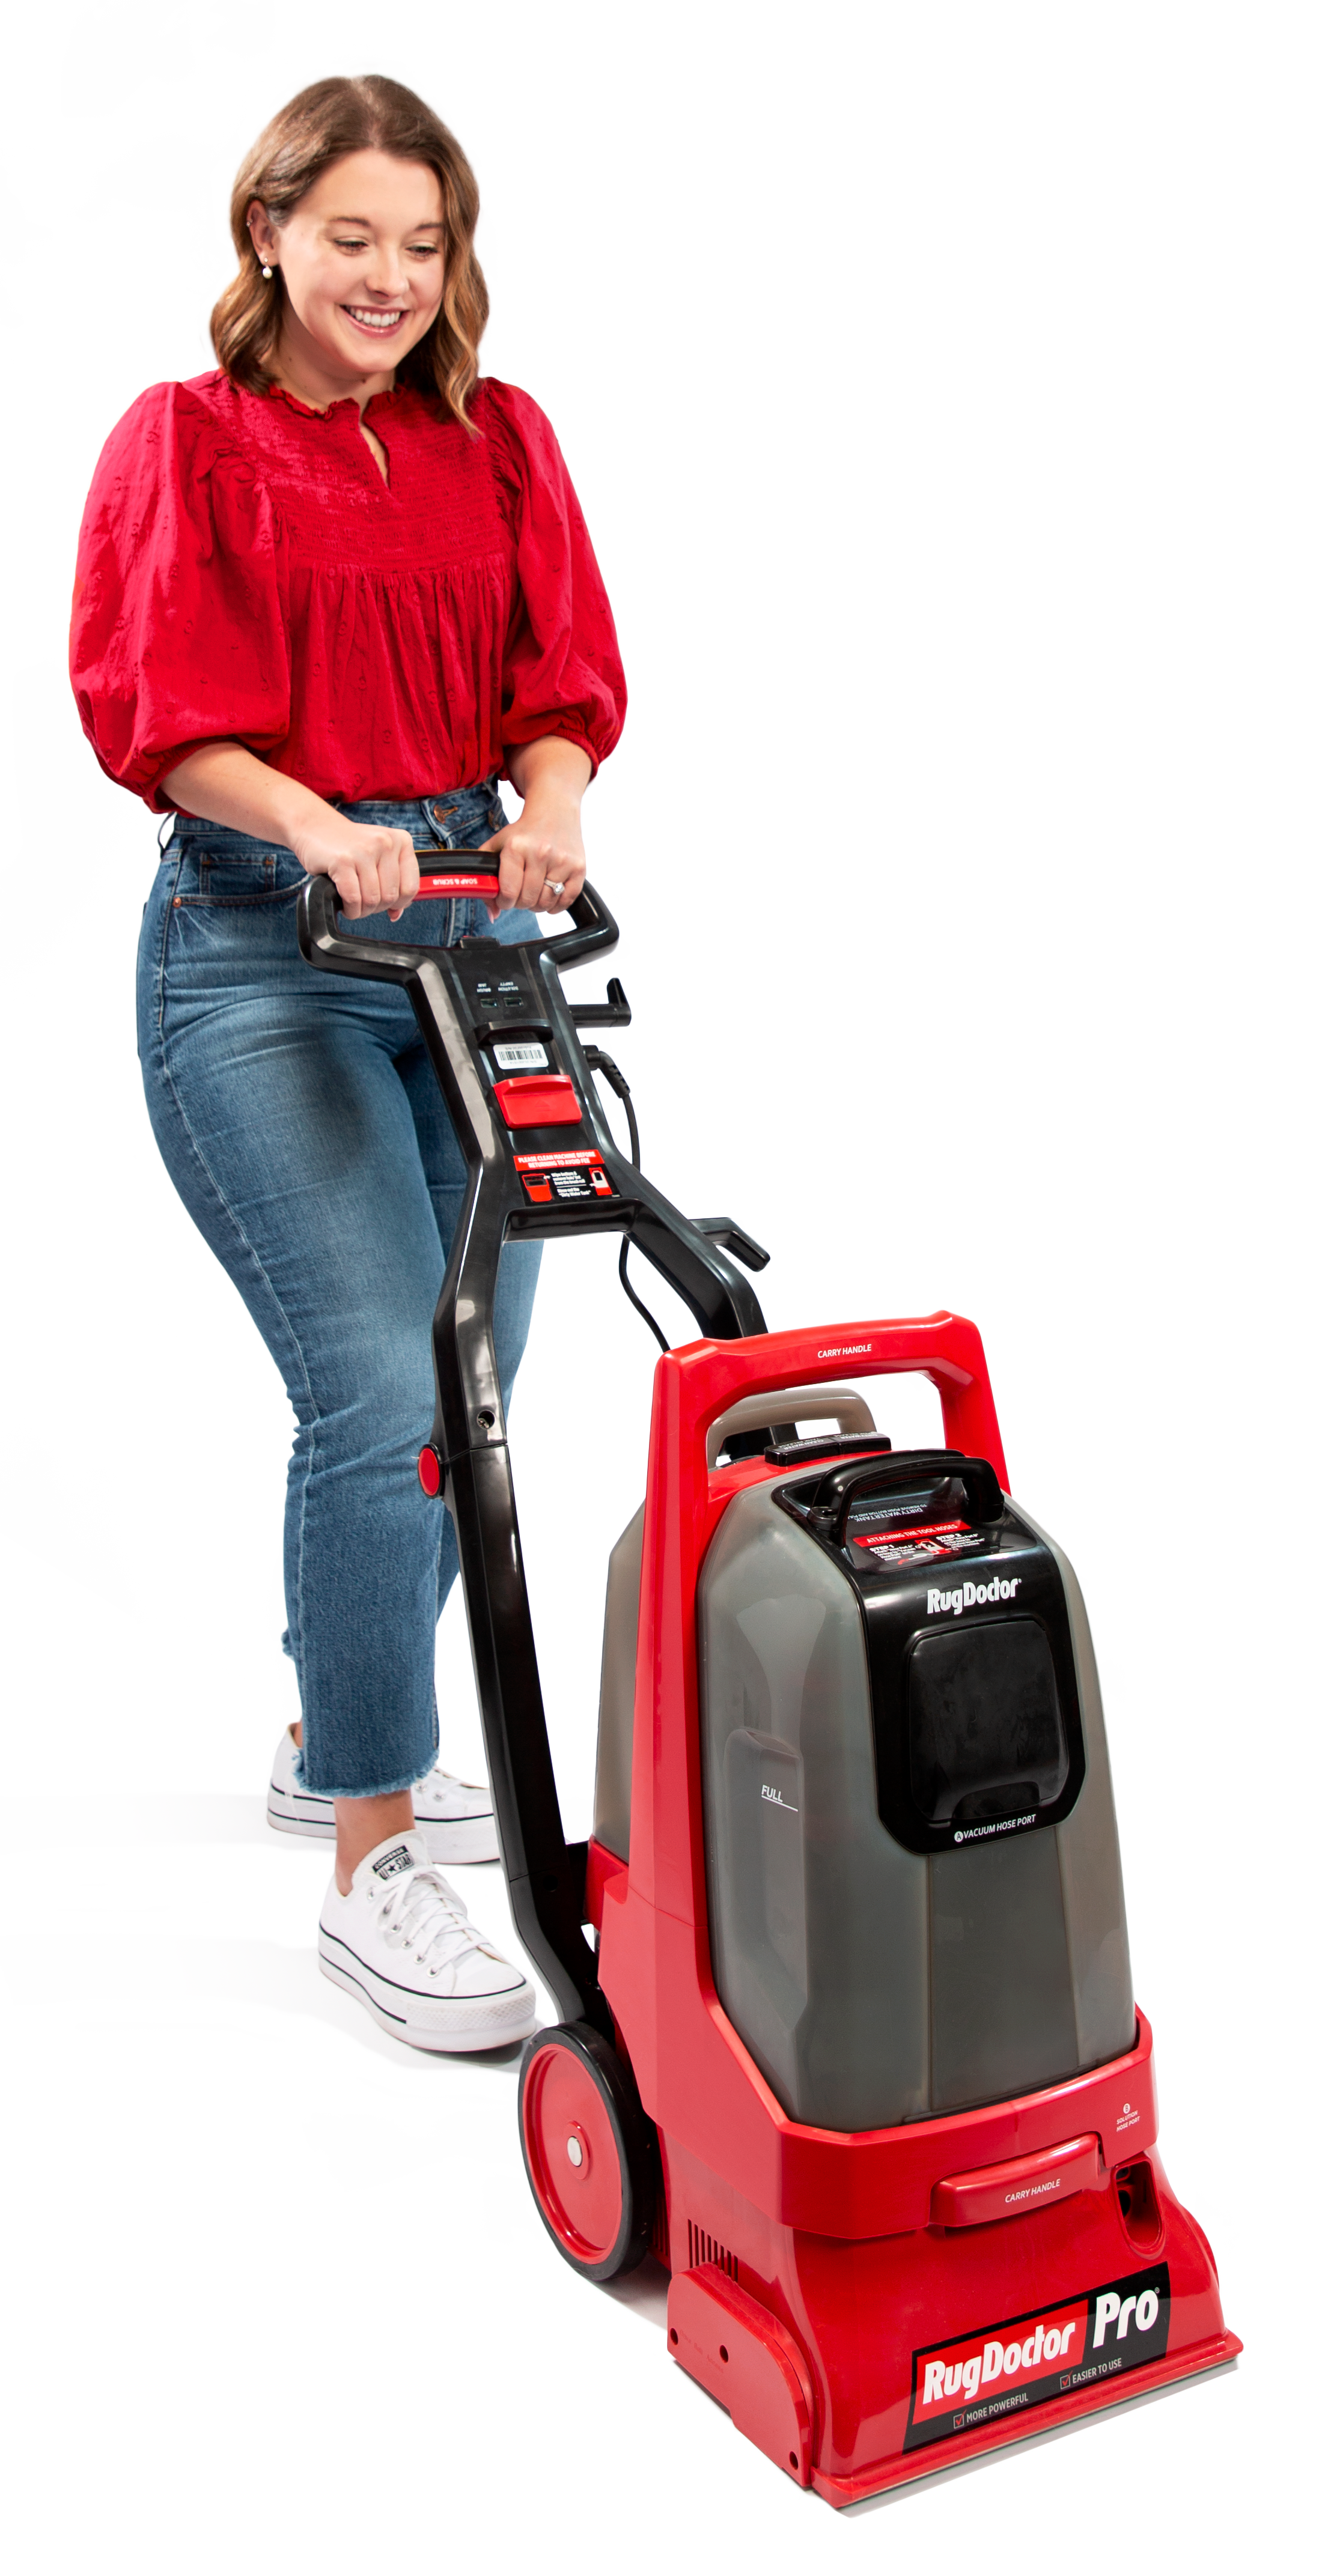 Hiring a Carpet Cleaner - How to Find the Best Carpet Cleaner